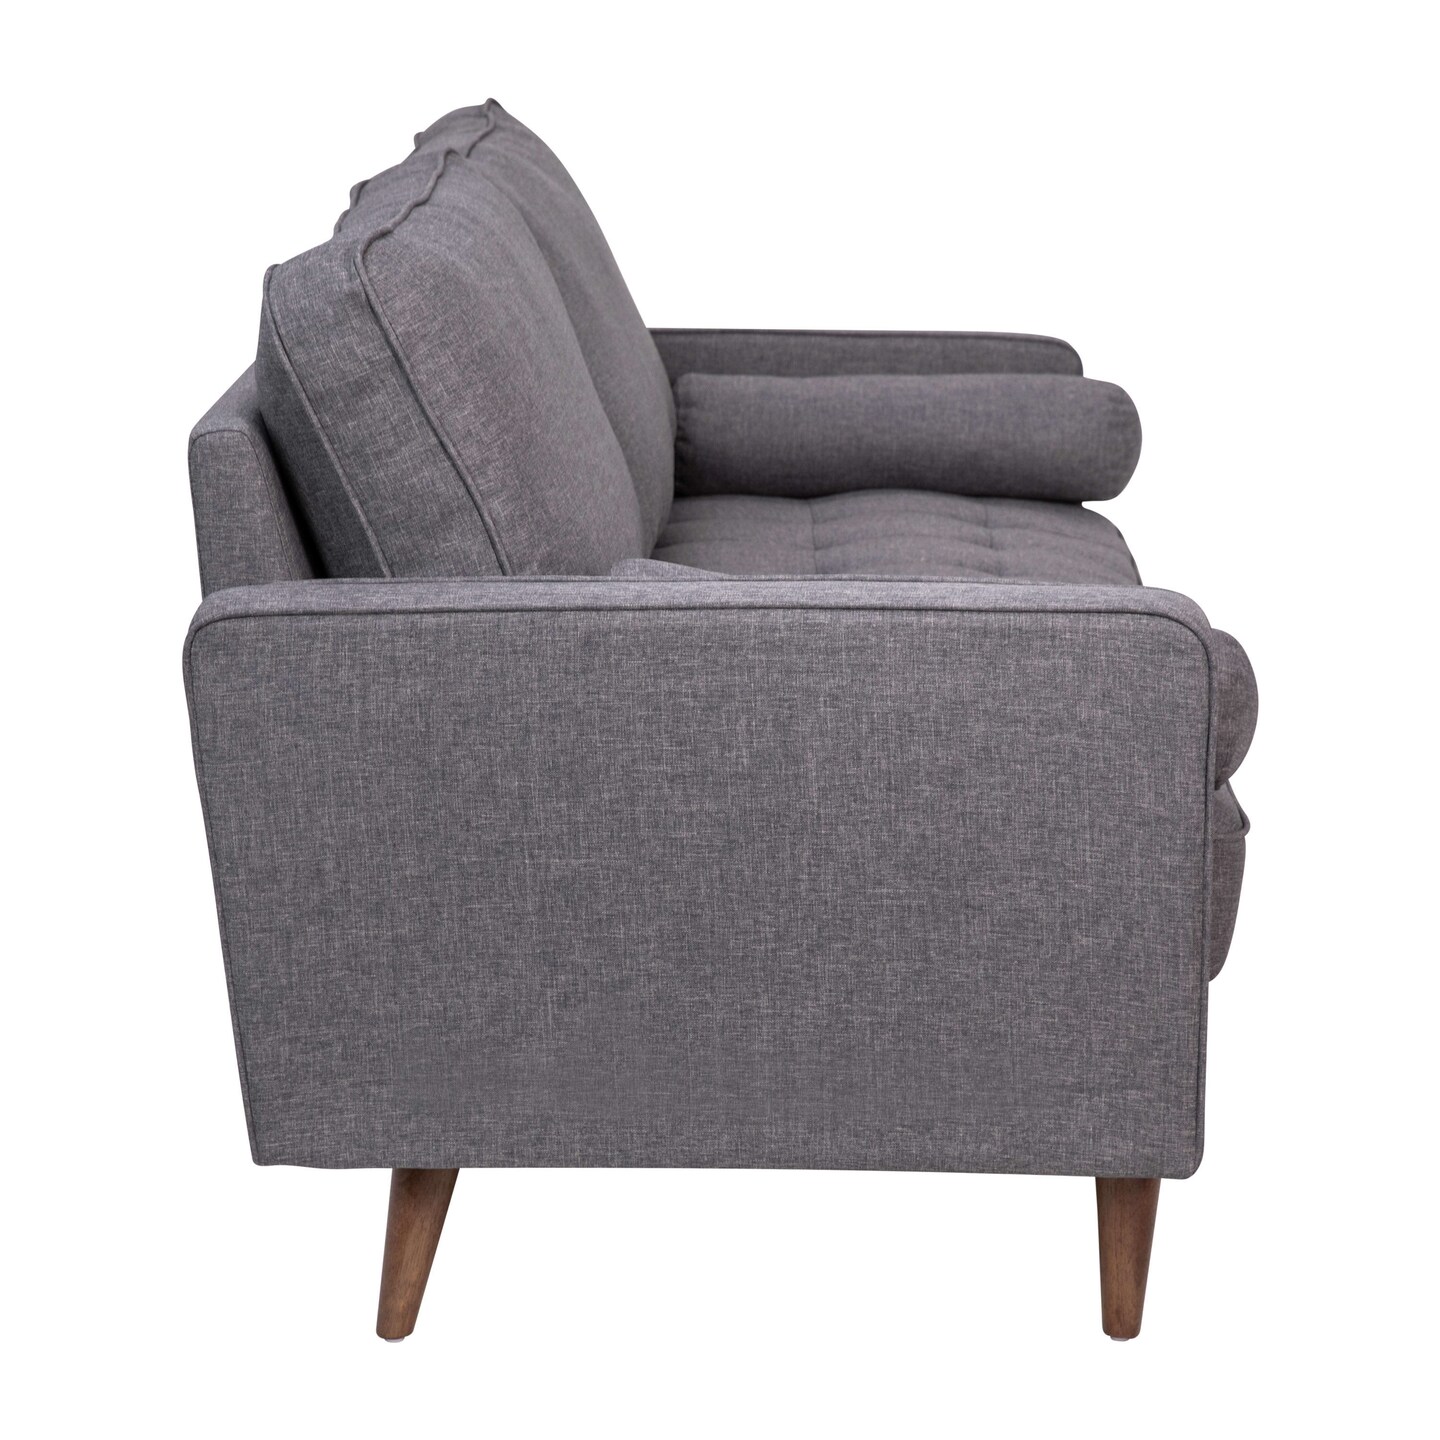 Emma and Oliver Holden Upholstered Mid-Century Modern Pocket Spring Sofa with Wooden Legs and Removable Back Cushions